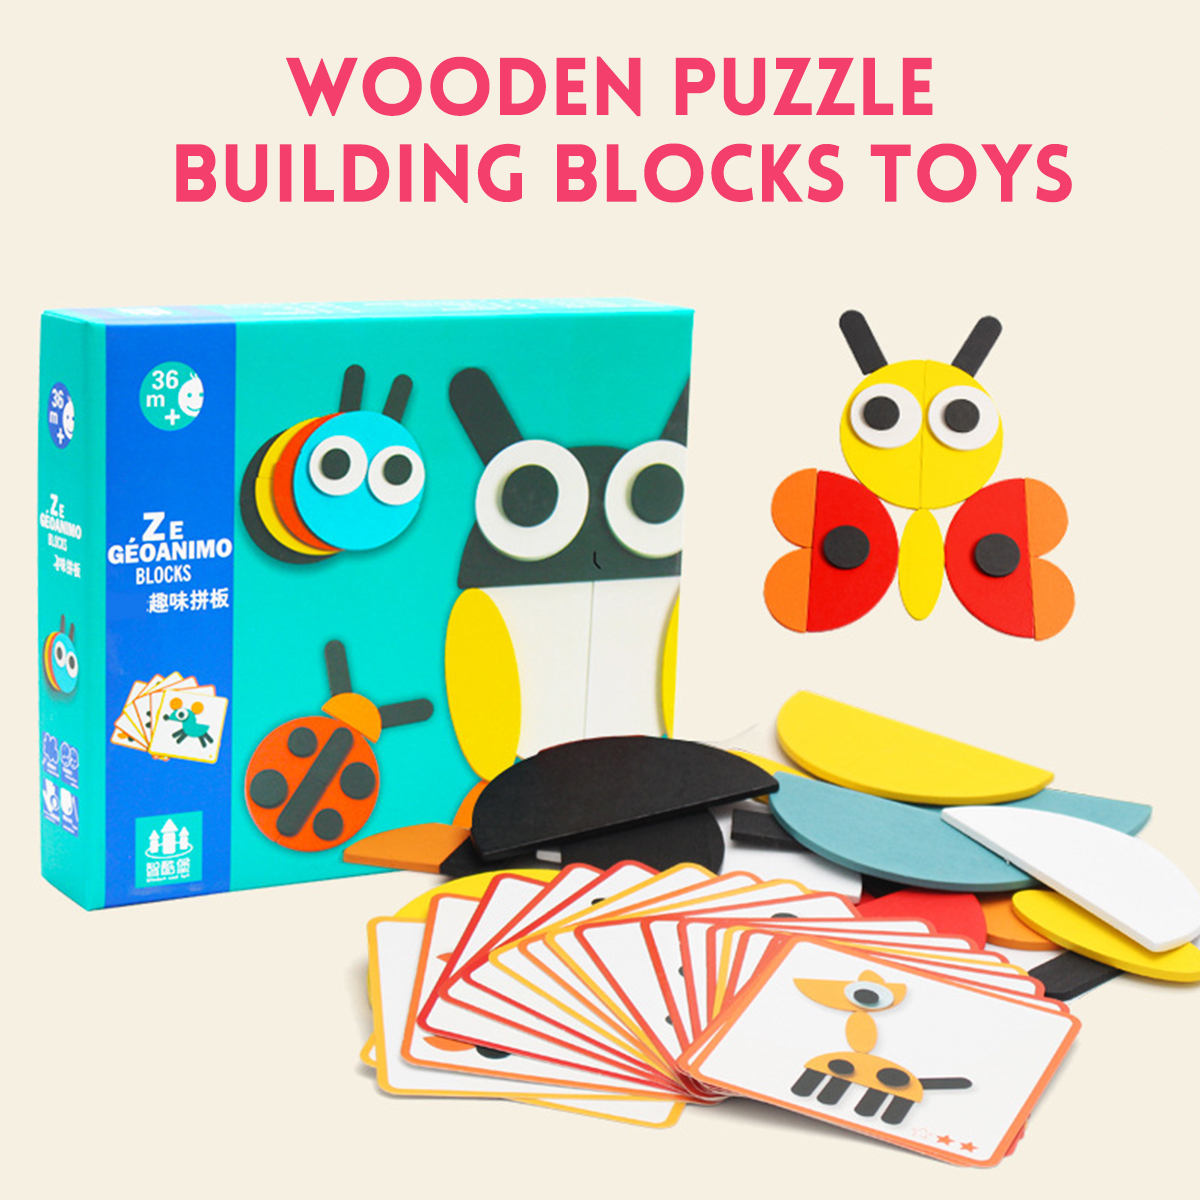 Wooden-Stereo-Puzzle-Building-Blocks-Kids-Early-Educational-Learning-Toys-Gifts-1709243-2